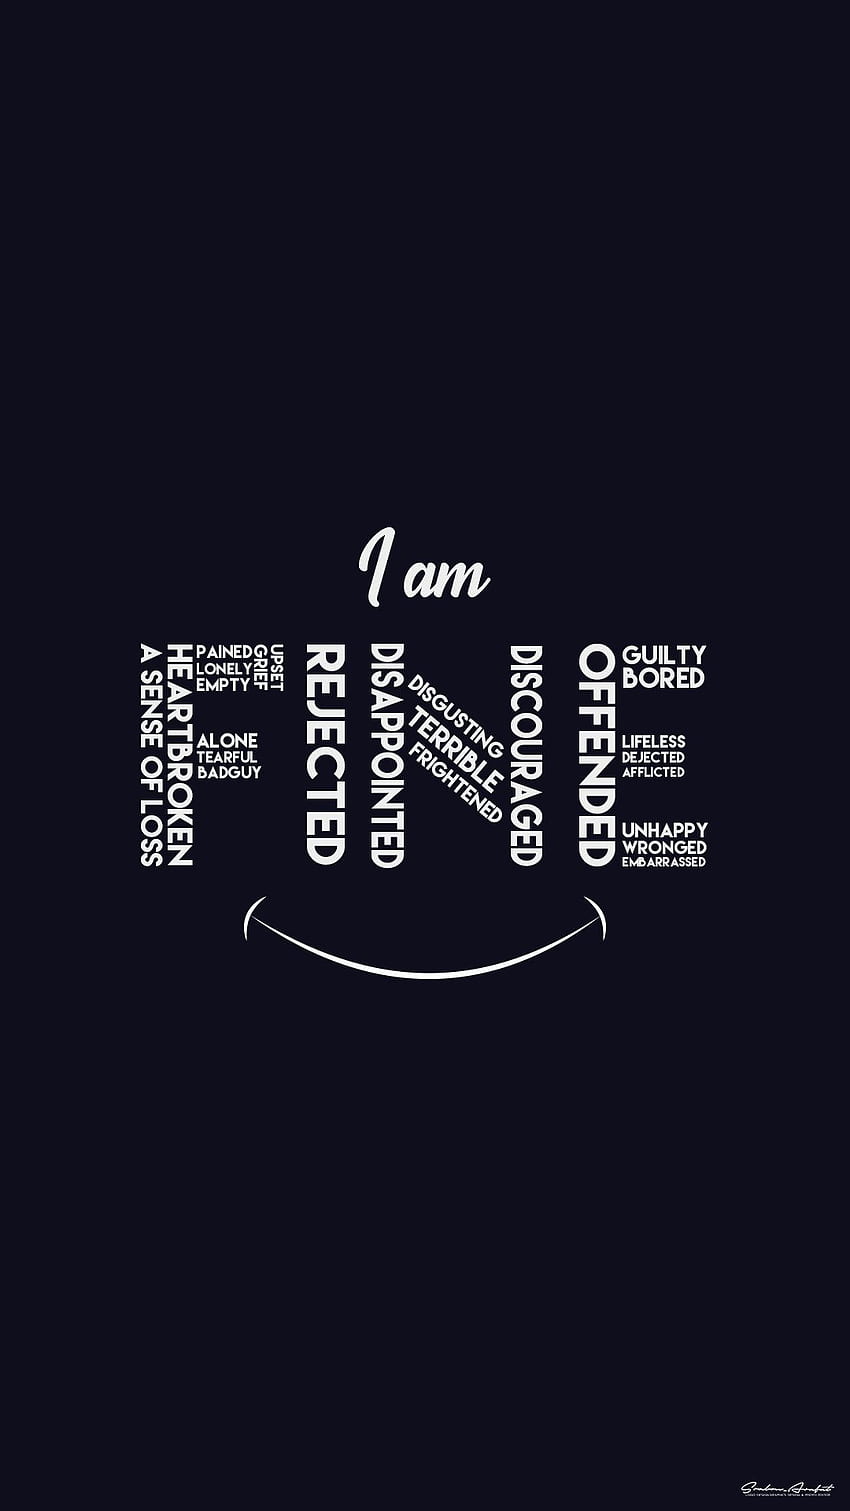 I'm Fine in 2020. Belief quotes, Quote posters, Genius quotes HD phone wallpaper